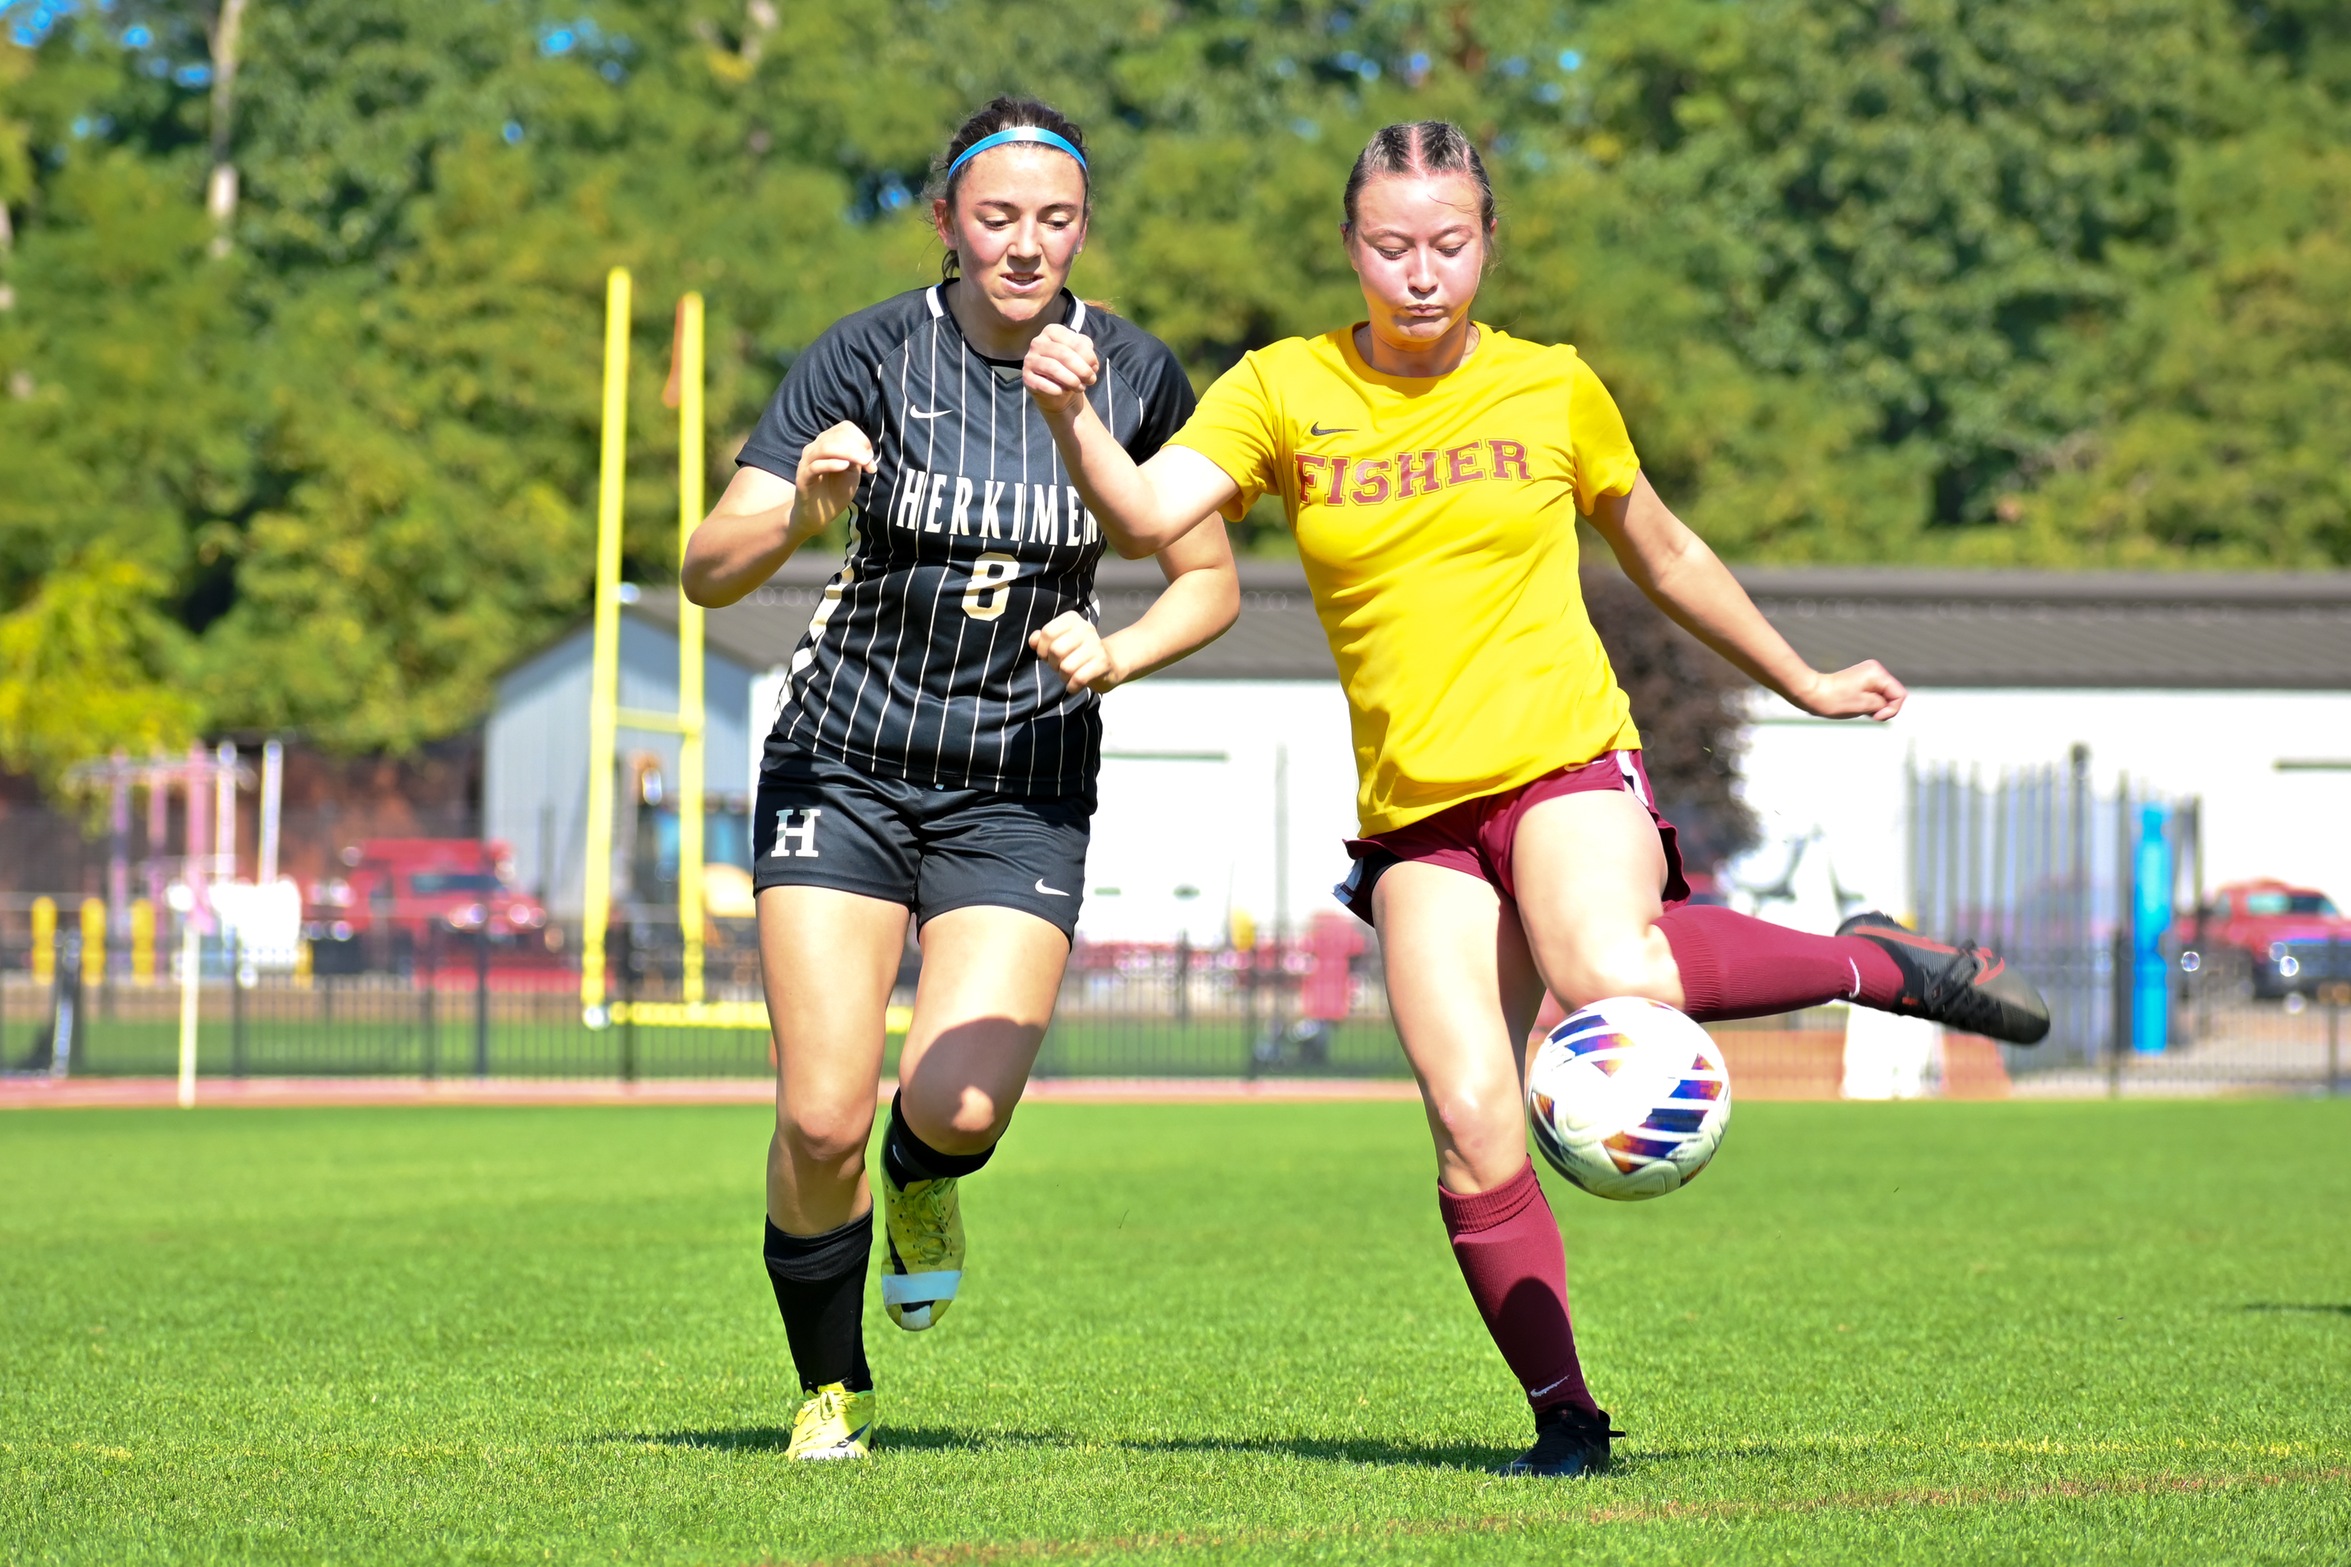 Lazzara's Late Game-Winner Gives Women's Soccer Eighth Straight Win